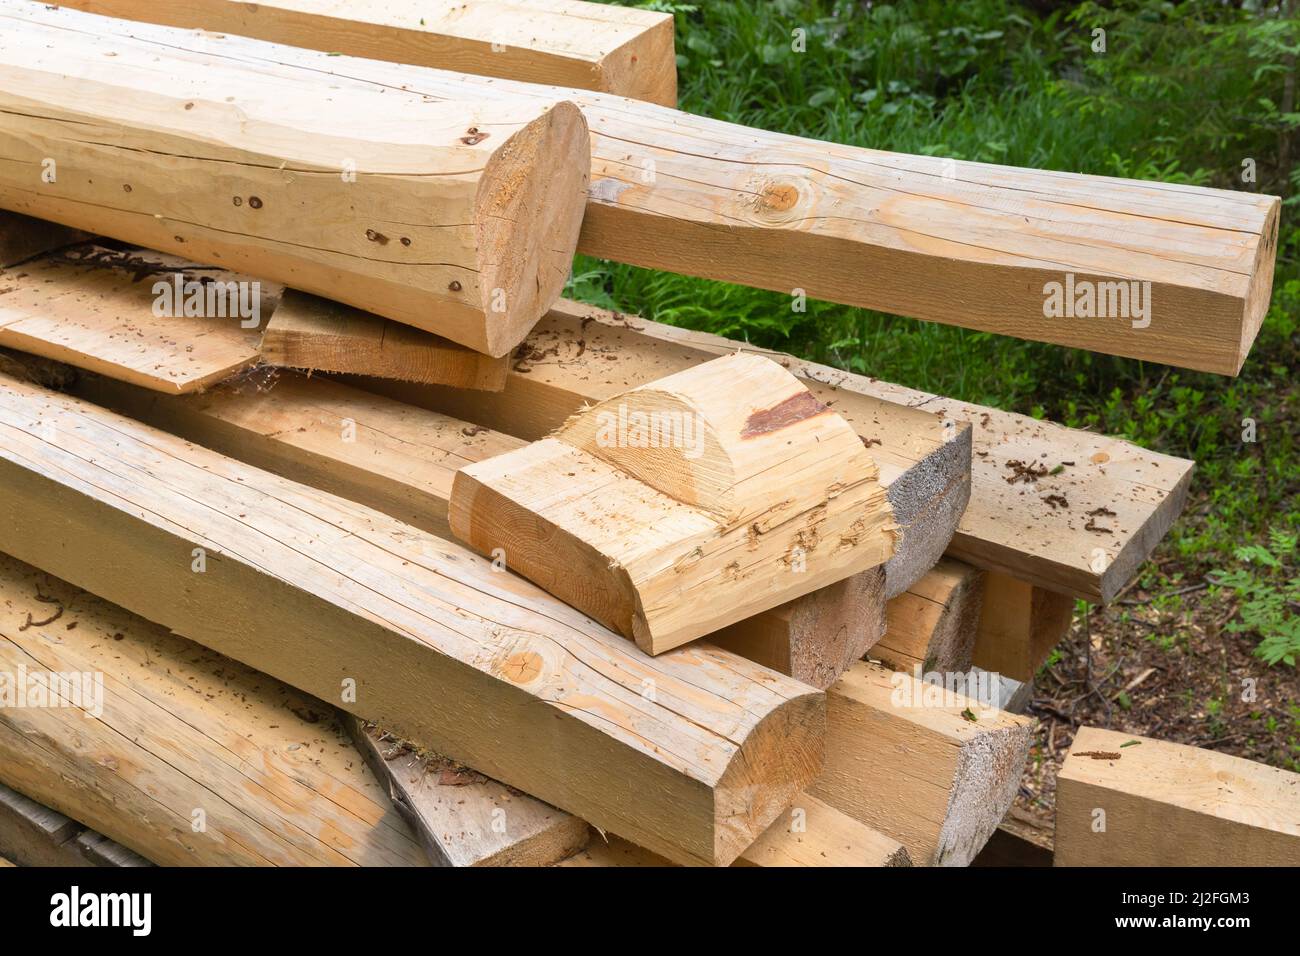 Wooden boards and logs, stacked wood for rural construction, close up Stock Photo